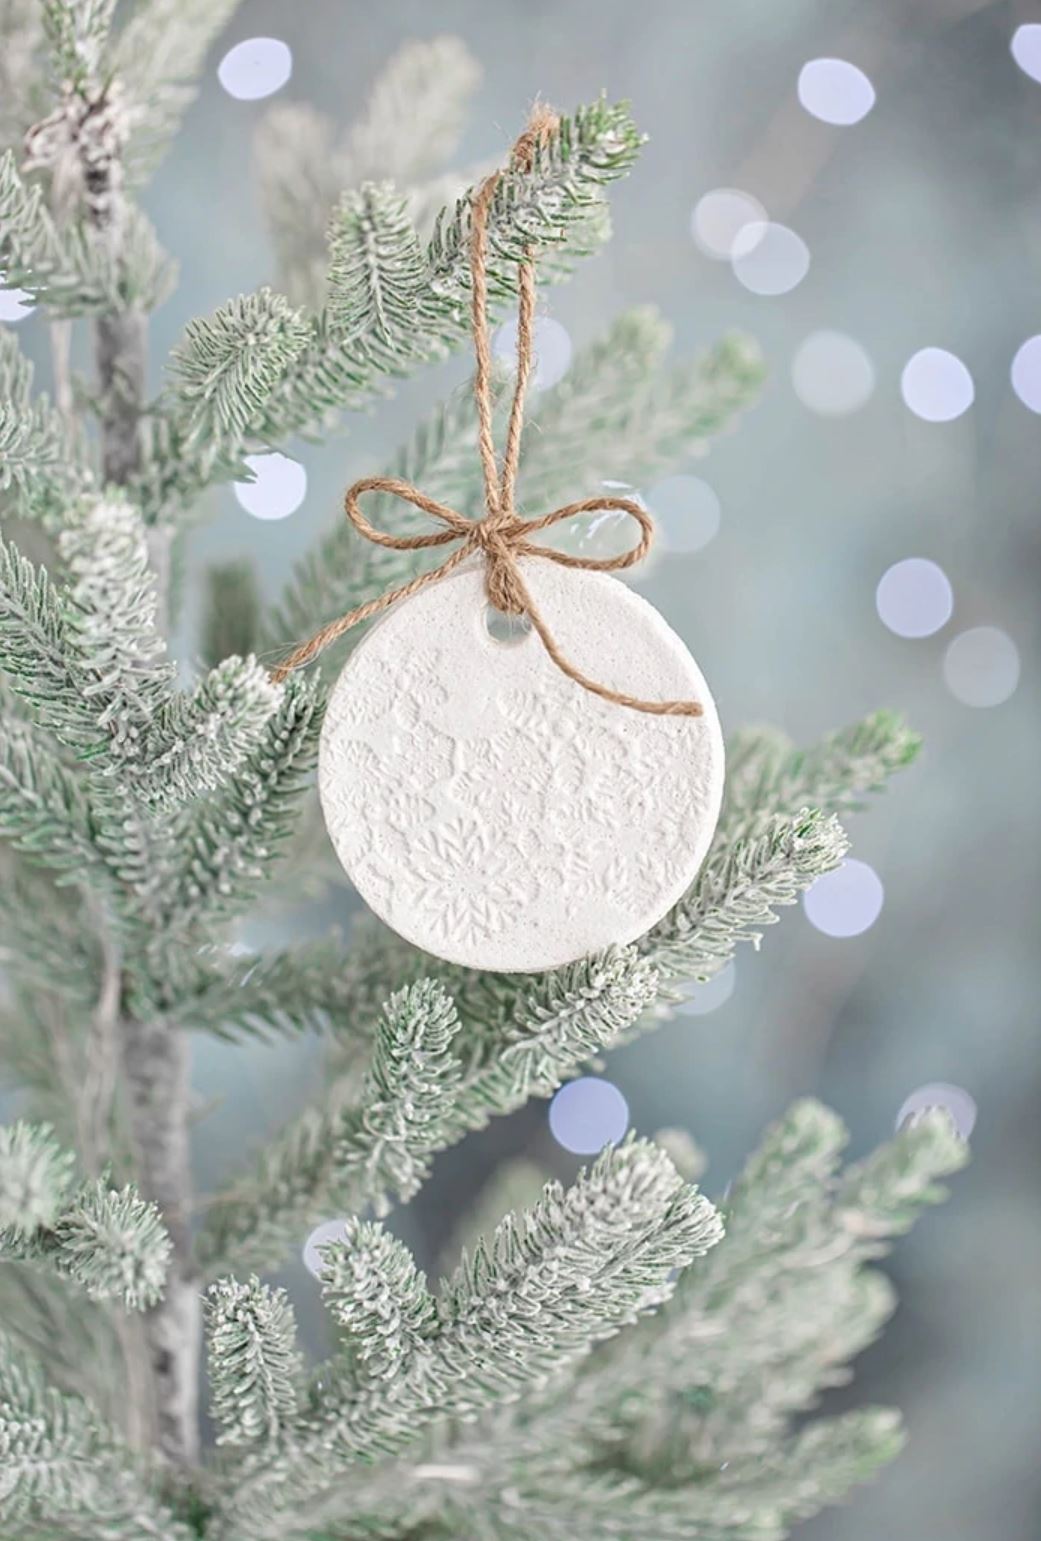 A patterned salt dough ornament hanging on a tree.